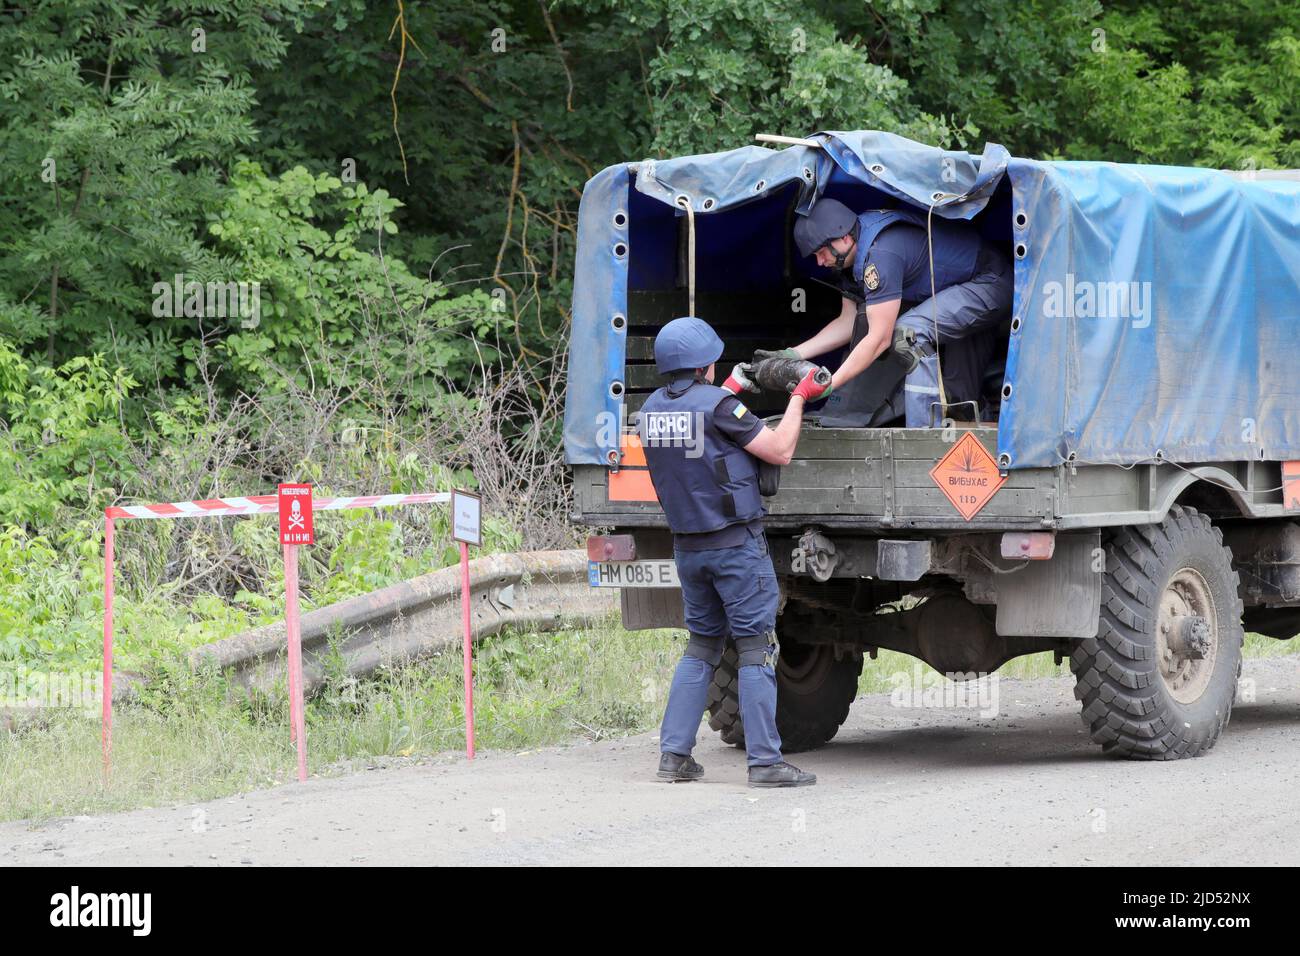 STANOVA, UKRAINE - JUNE 17, 2022 - Rescuers put ammunition lifted by State Emergency Service divers from the bottom of a body of water into the truck, Stock Photo